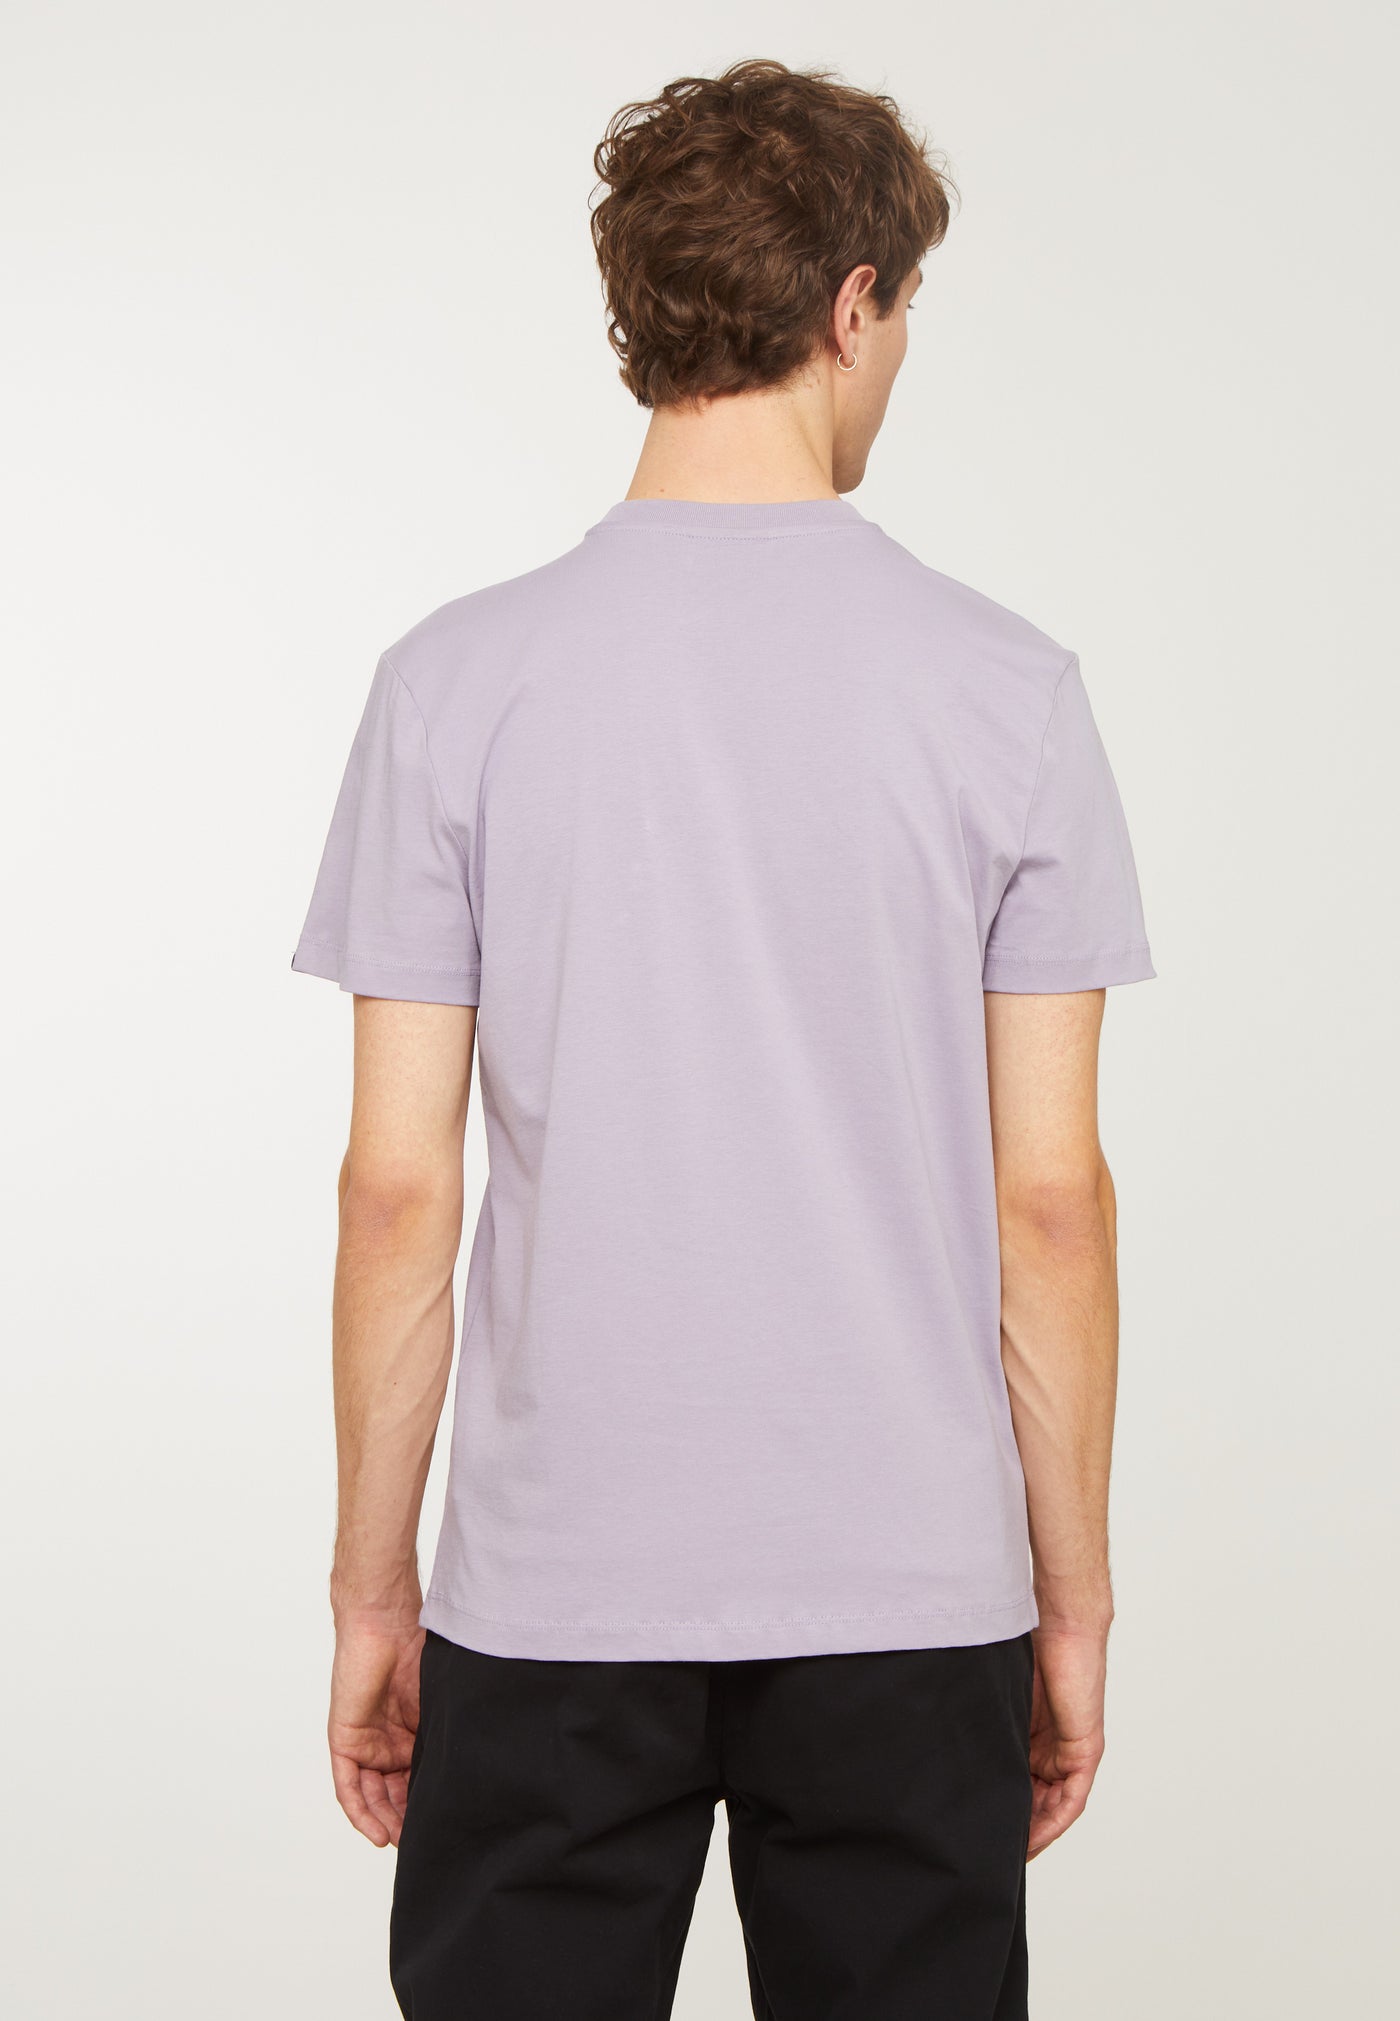 T-Shirt Agave Bike Letters Grey Lilac